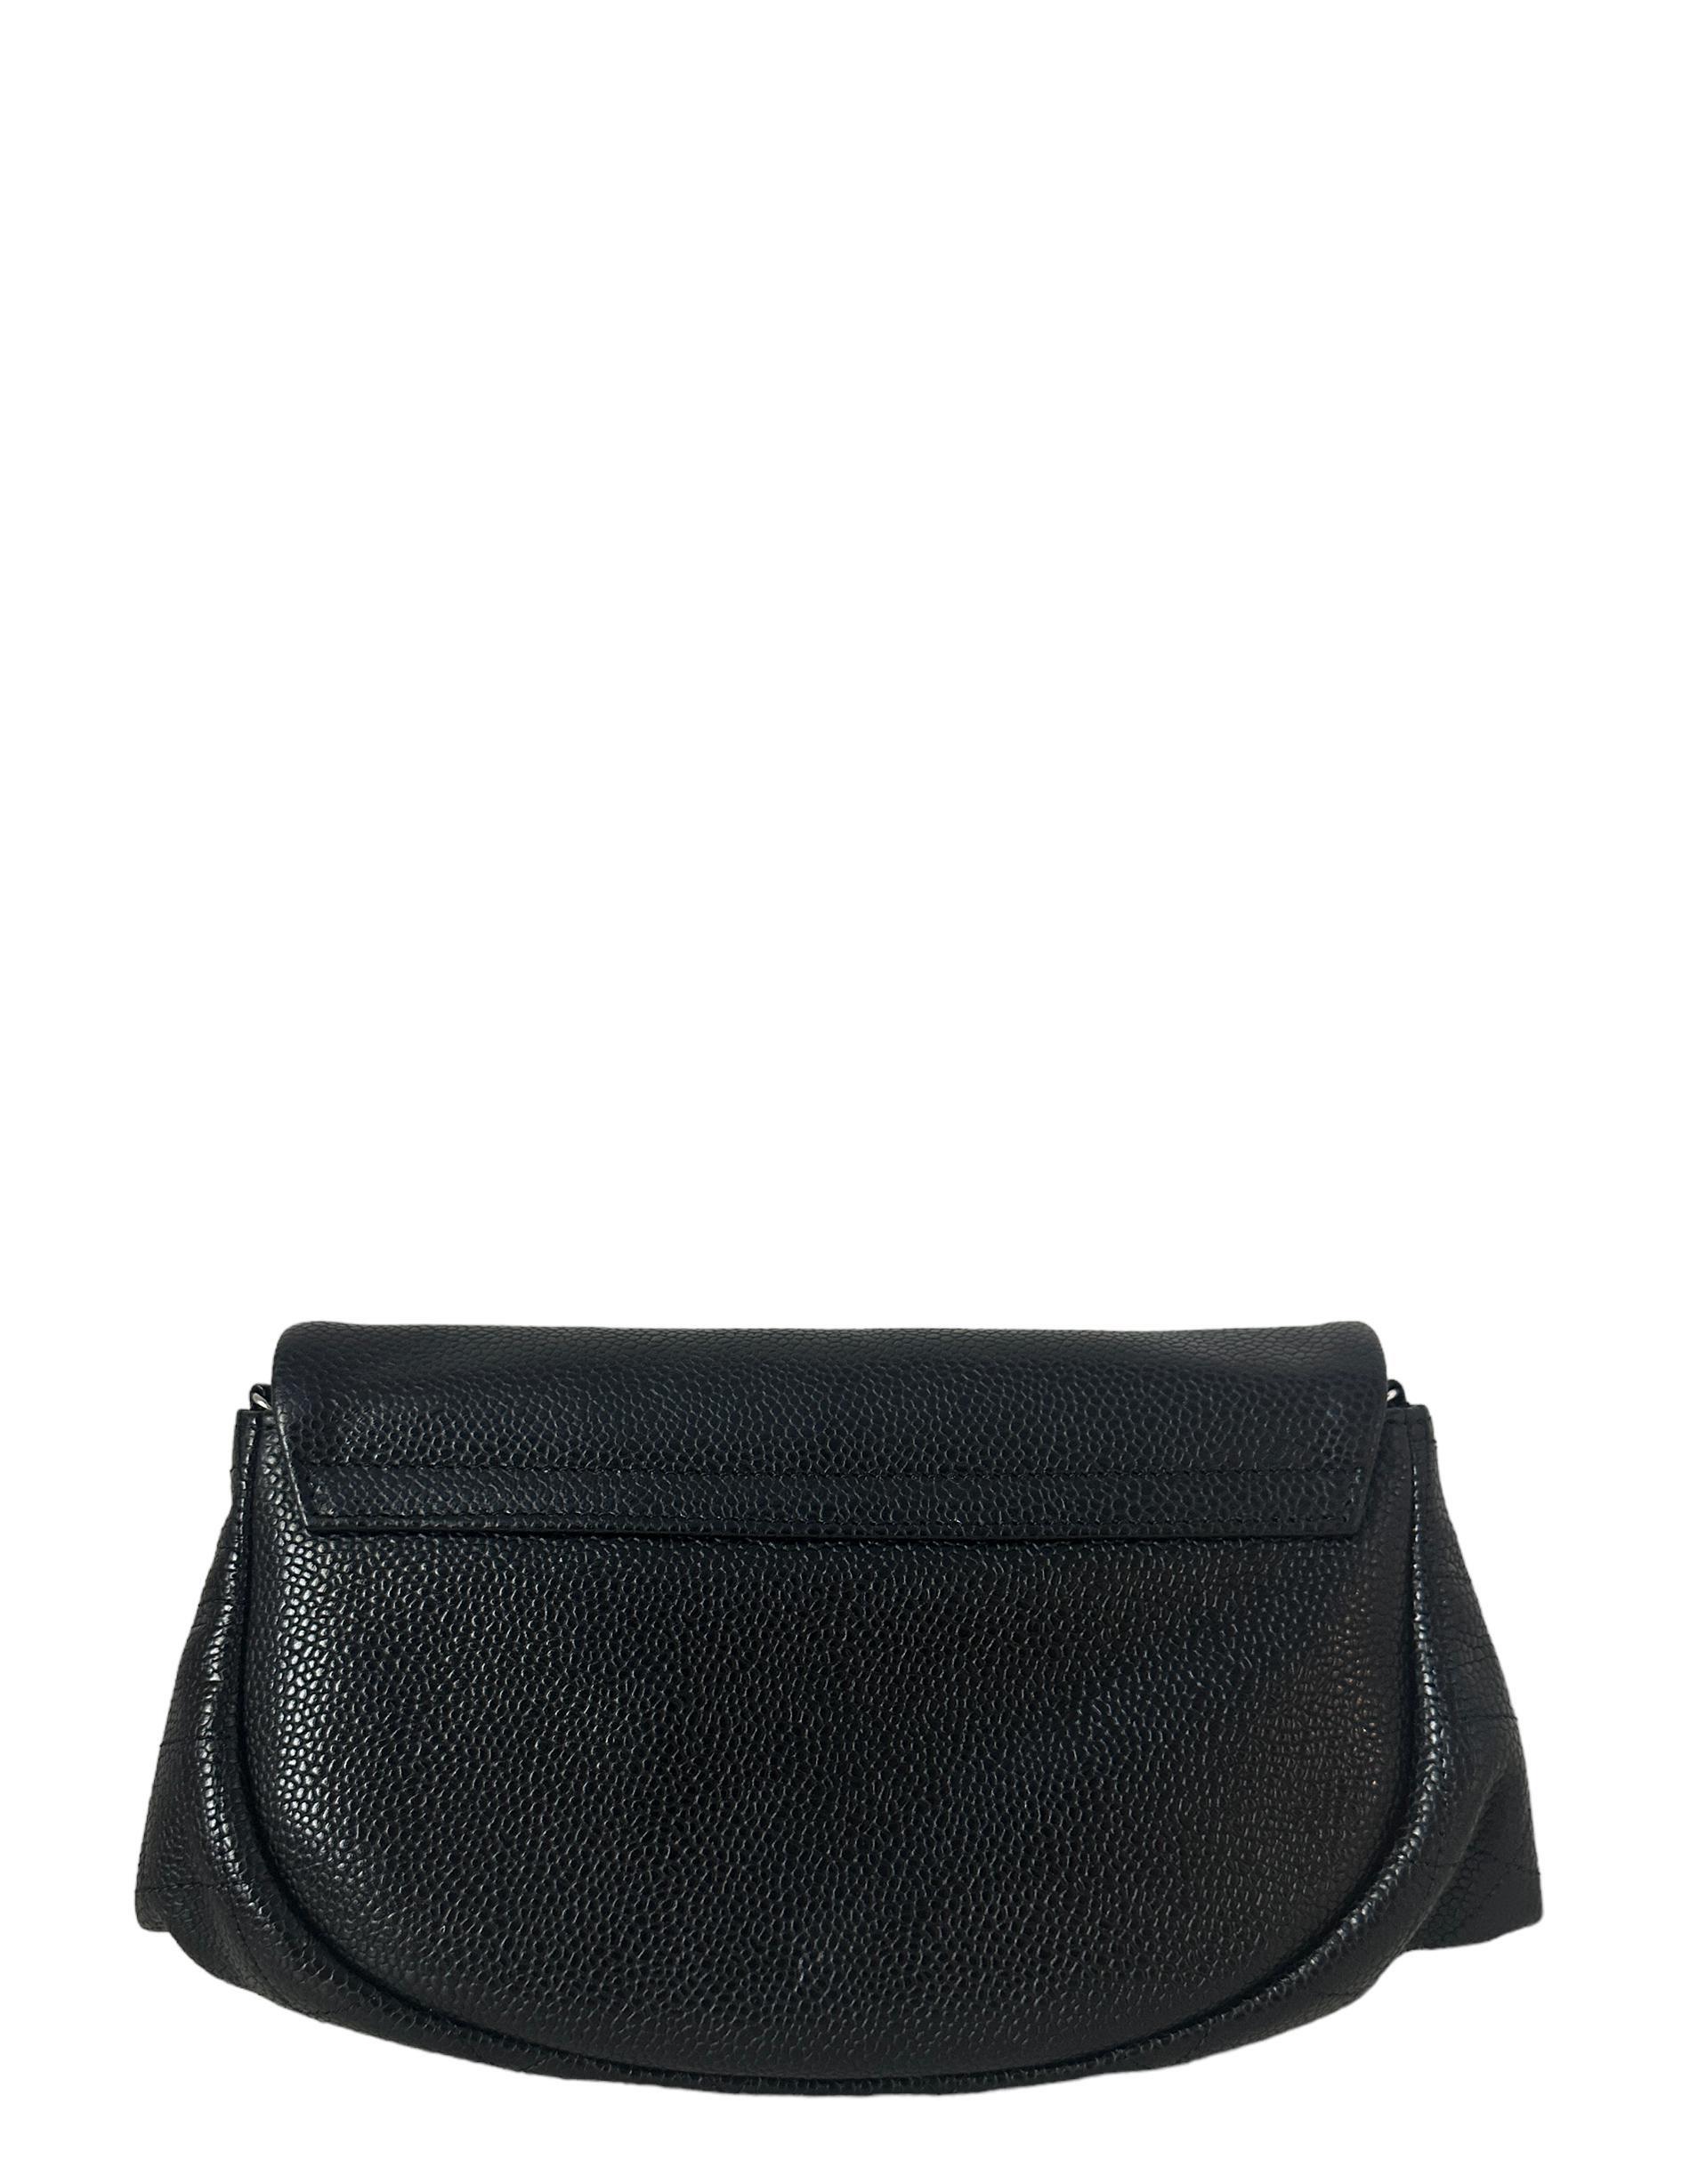 Chanel Black Caviar Leather Half Moon Wallet On Chain WOC Crossbody Bag. Chain can be tucked inside bag to also be worn as a clutch. 
Made In: Italy
Year of Production: 2012
Color: Black
Hardware: Silvertone
Materials: Caviar leather
Lining: Black